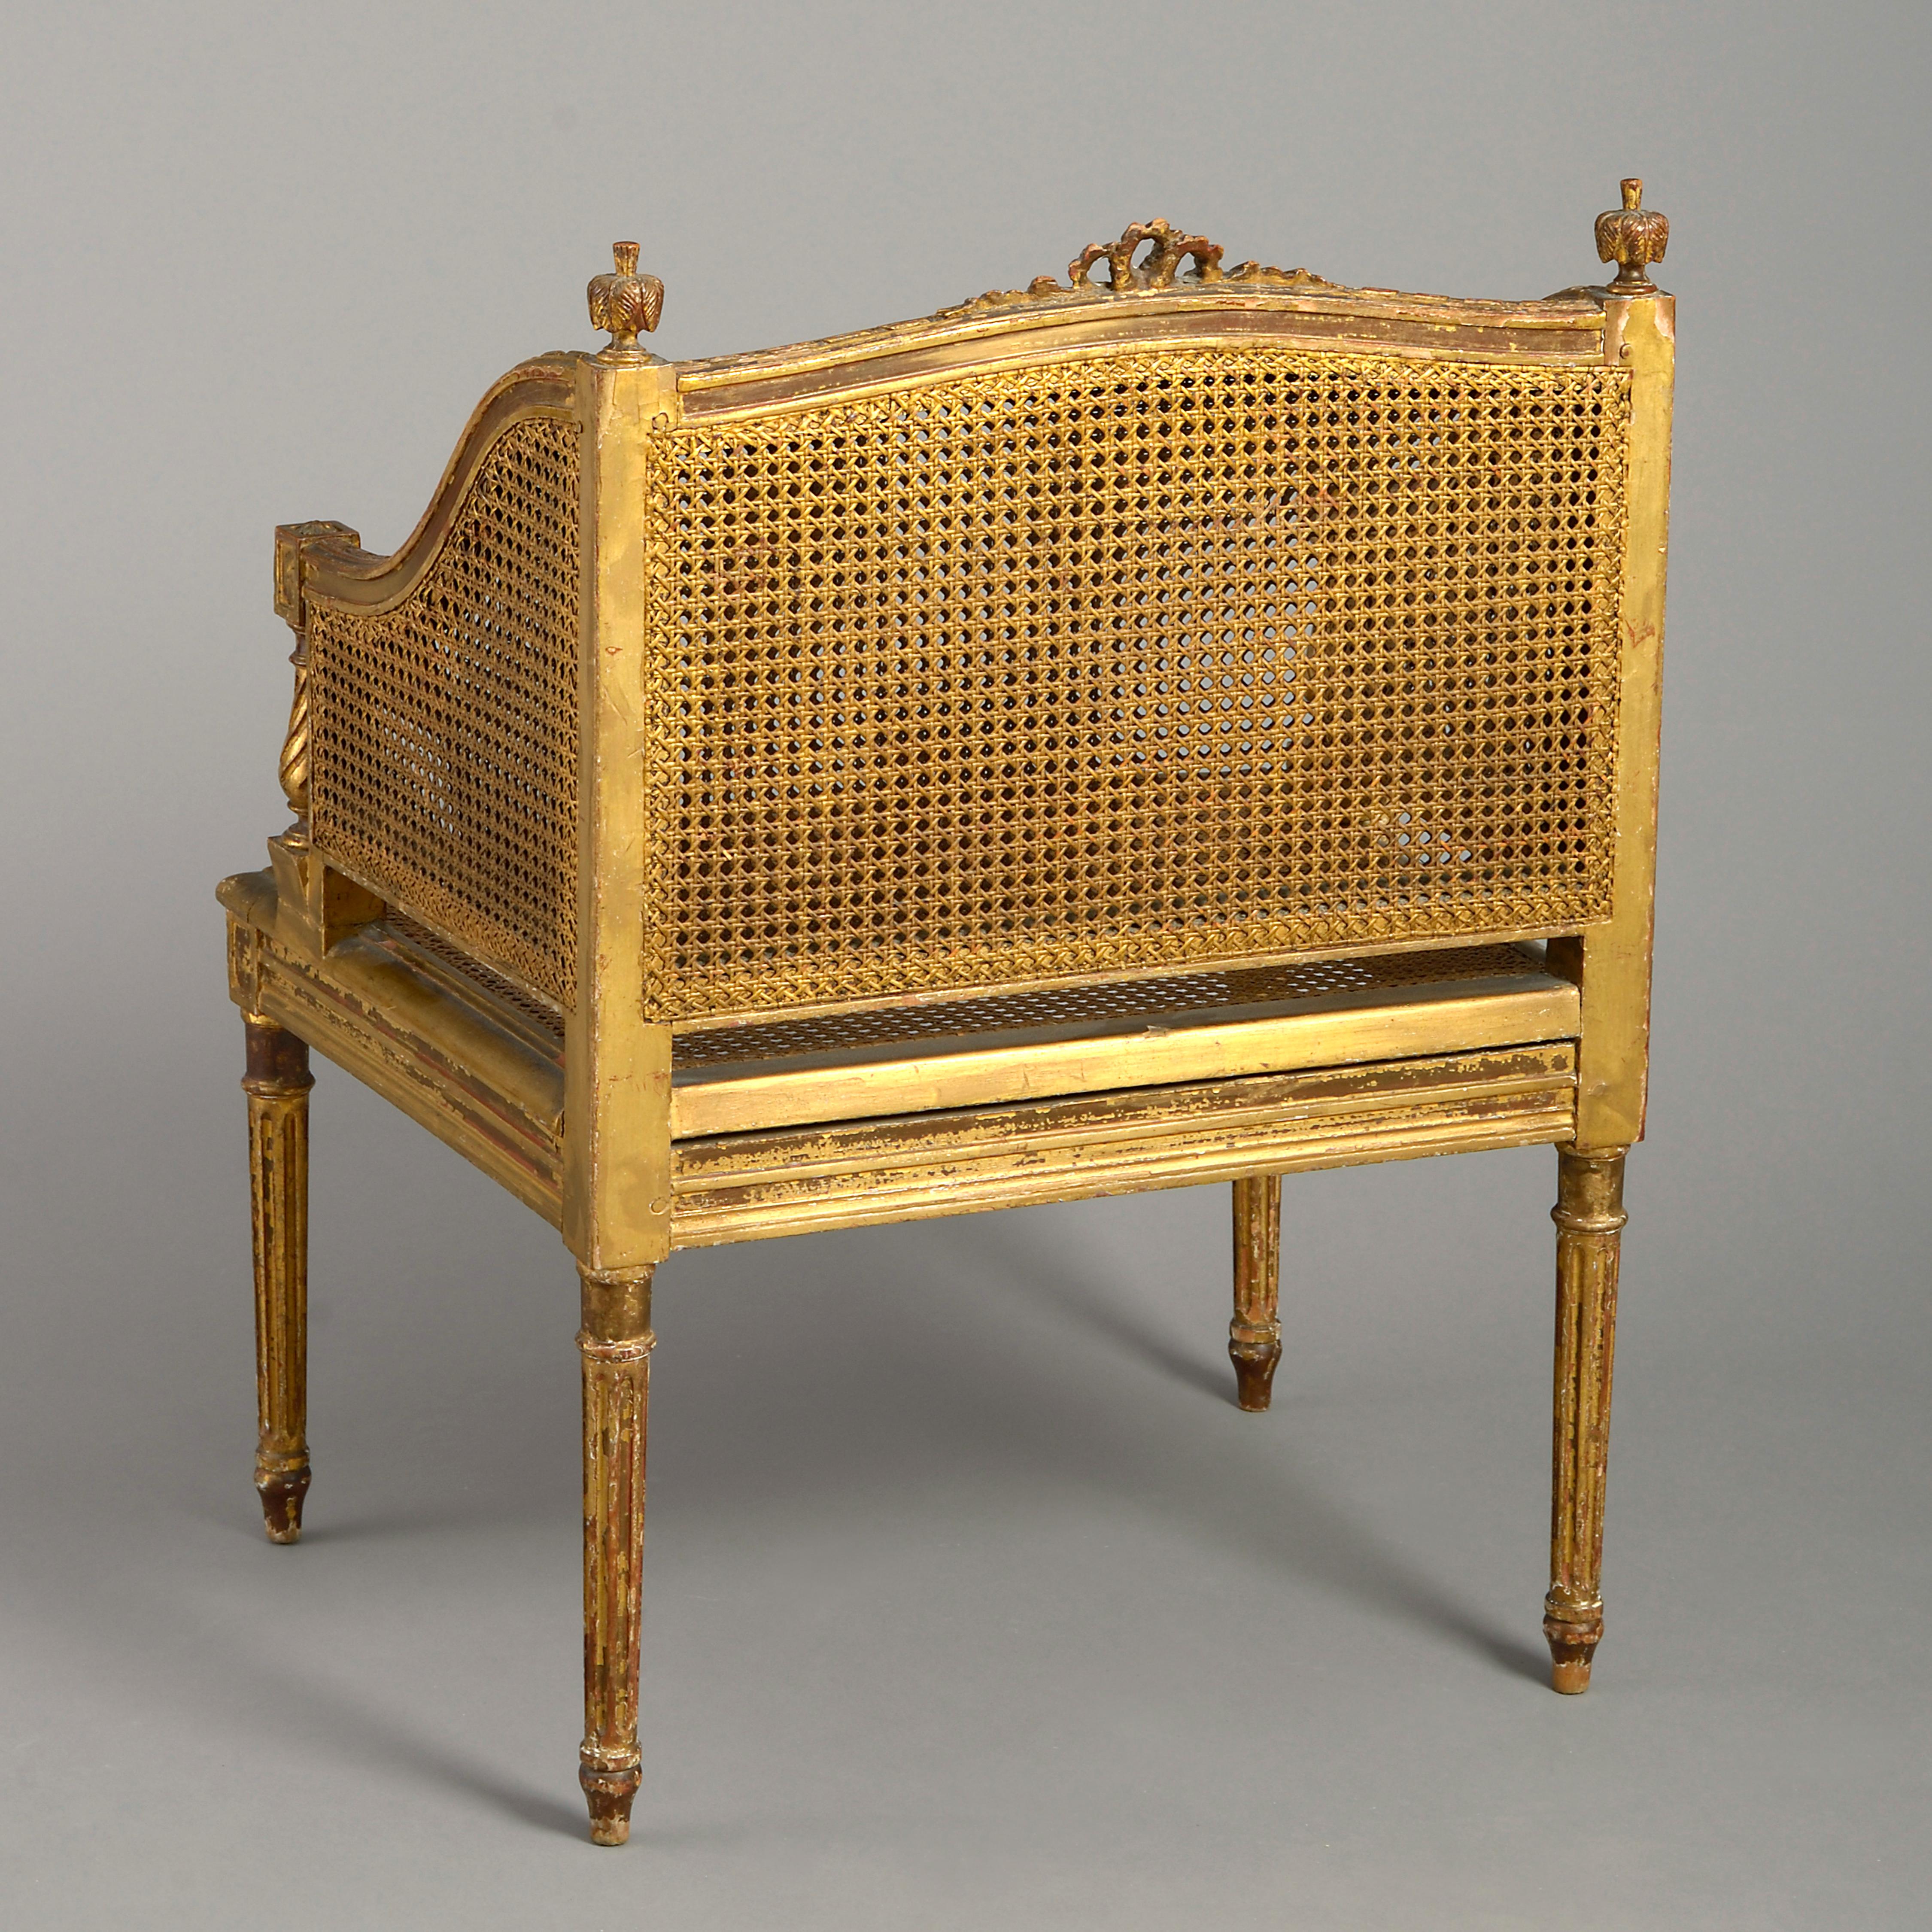 Carved 19th Century Louis XVI Style Canework Bergère